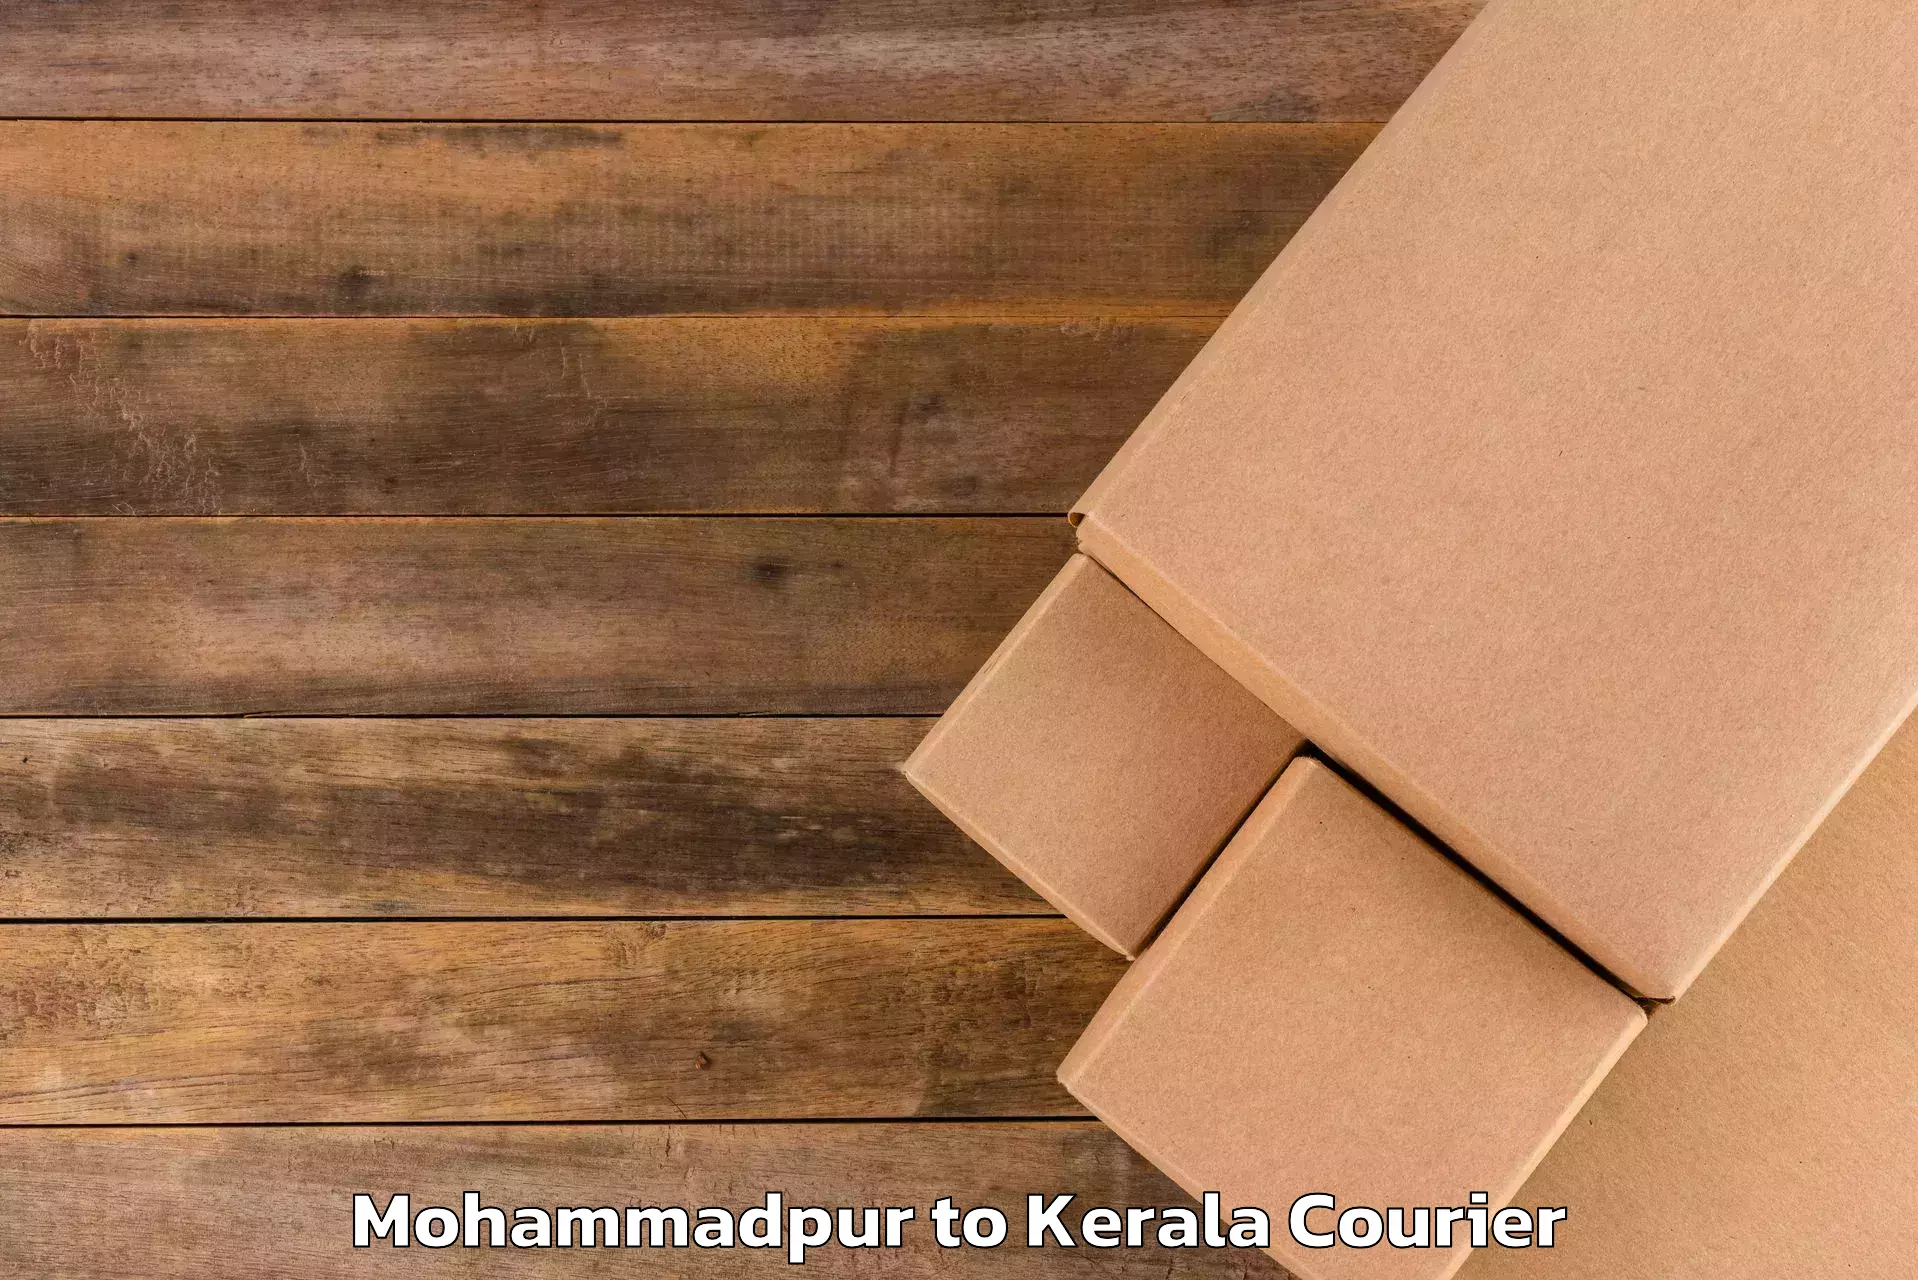 Hassle-free luggage shipping Mohammadpur to Kerala